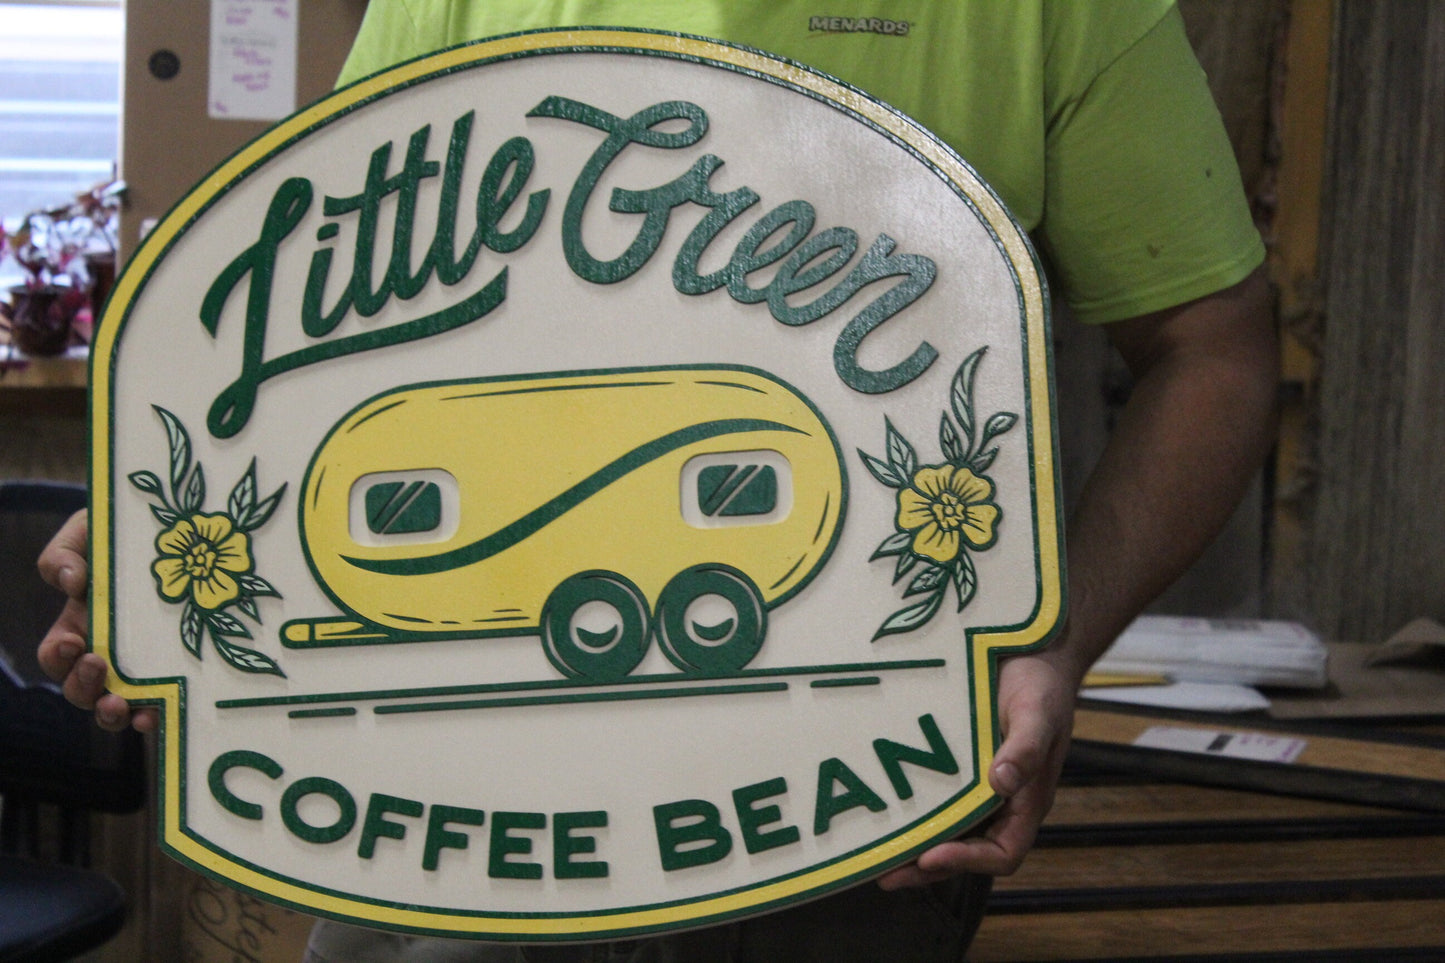 Coffee Shop Little Camper Coffee Bean Yellow Green Design Logo Image Large Round Custom Wood Sign Can Be Hanging Indoor Outdoor Minimalist